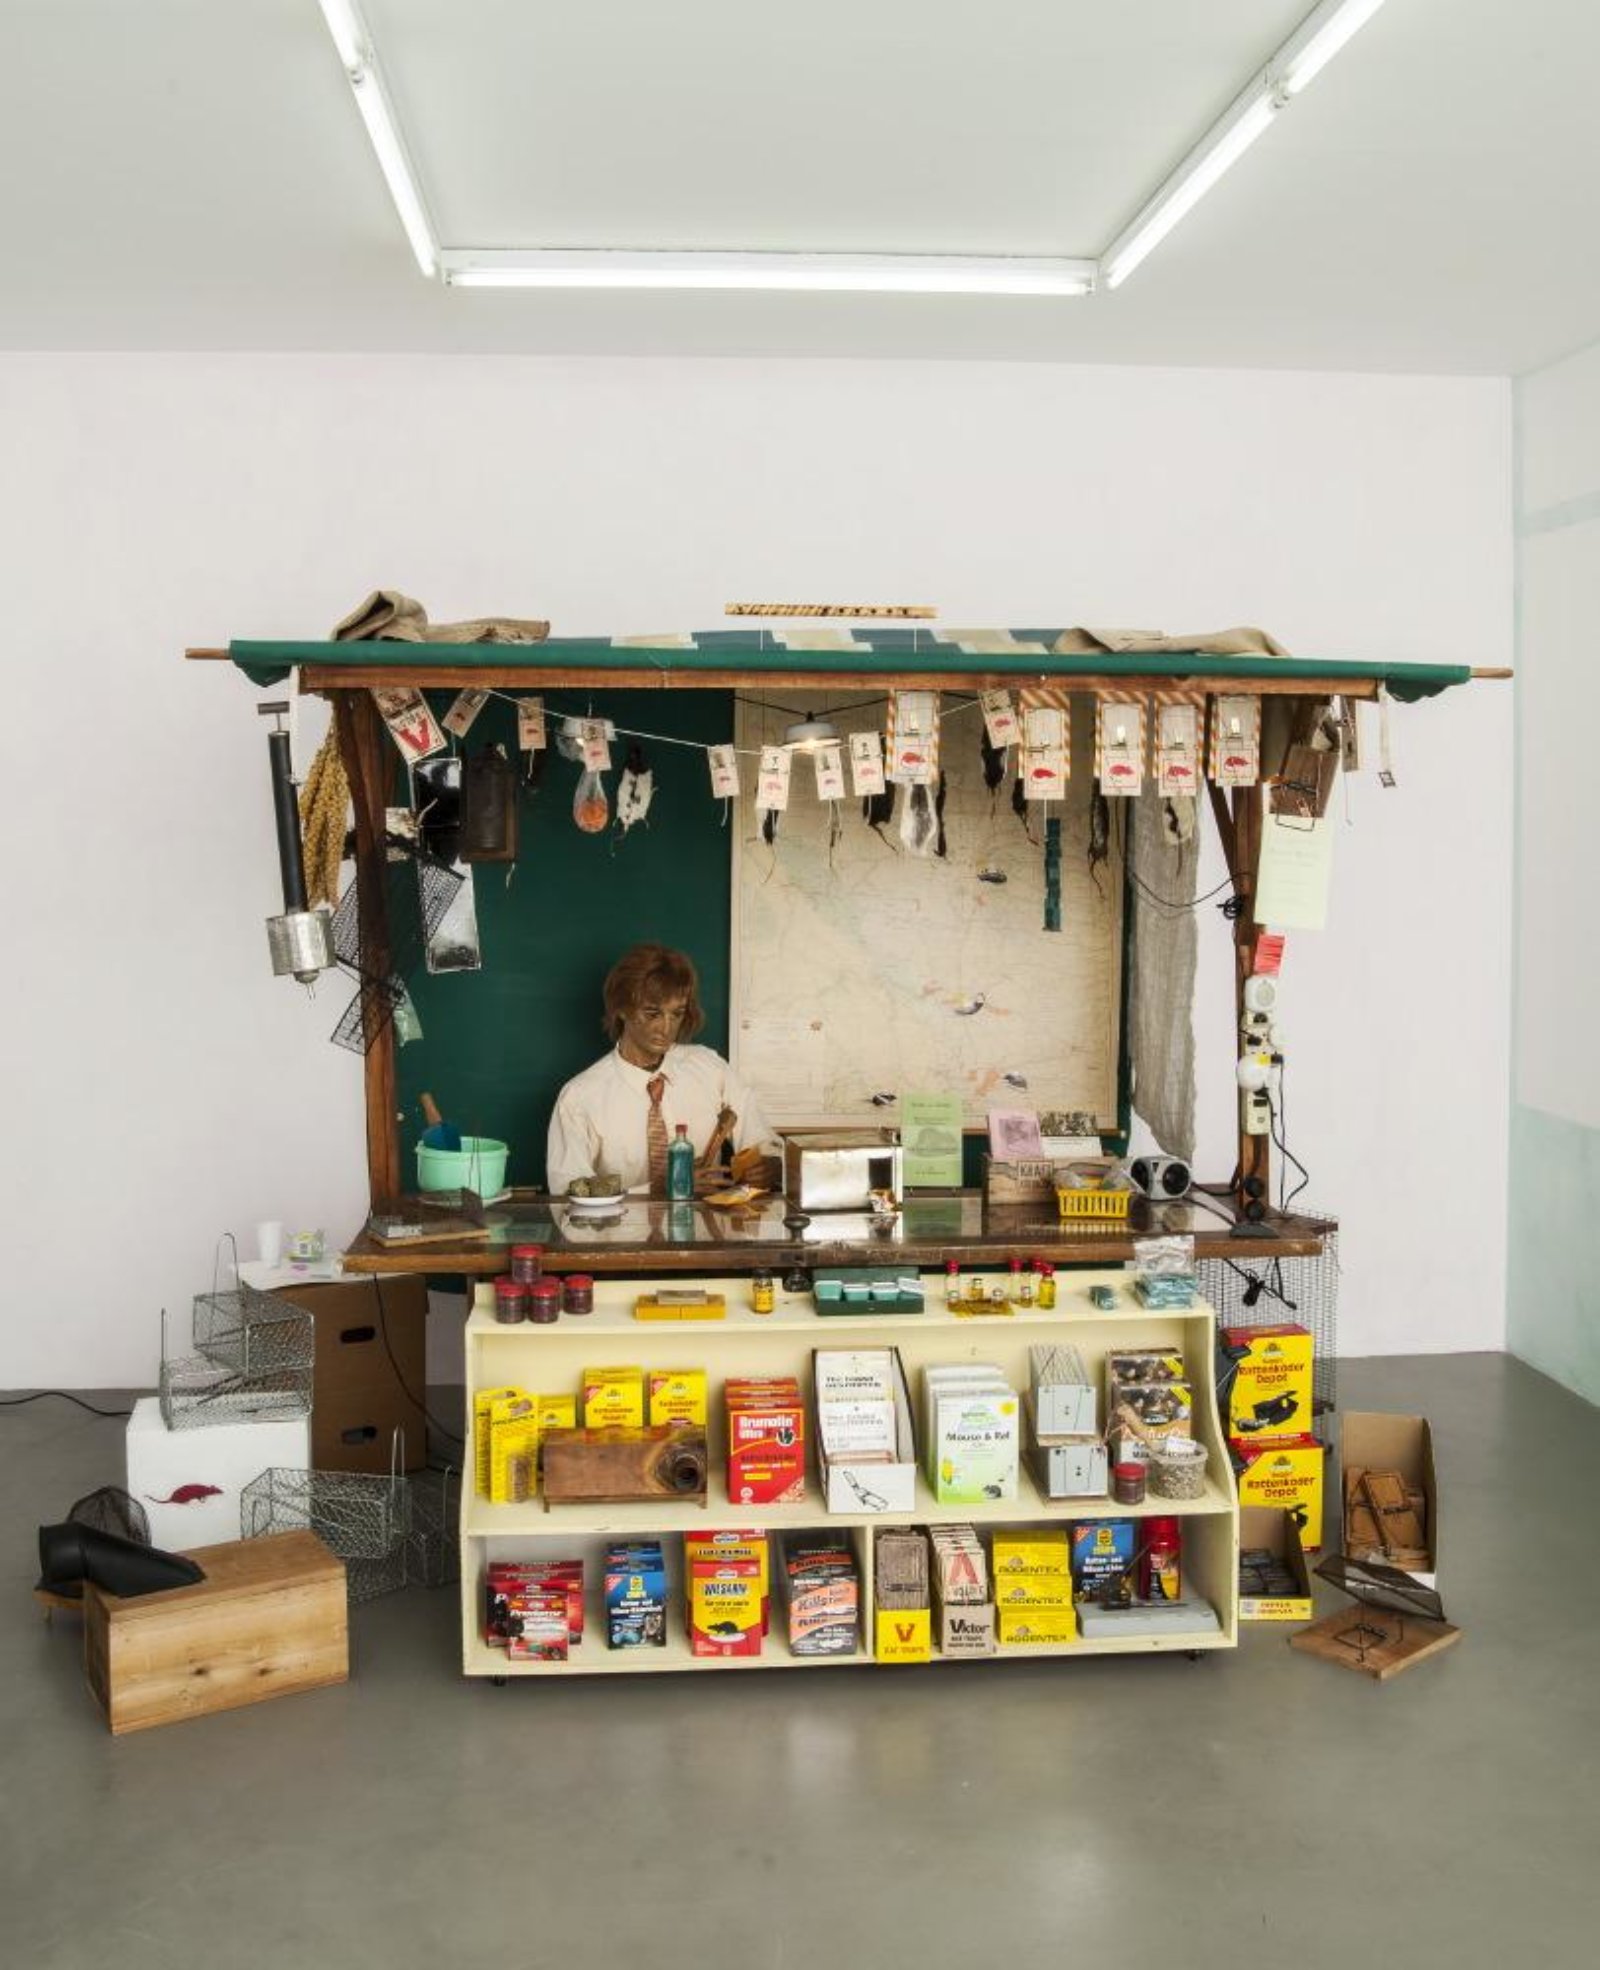 Ashes Withyman, An Ultrasonic Flute, 2013–2014, main structure: wooden framework, painted canvas, map of Alberta with collage, press-on letter-sign, folded metal wheeled carrier, folding steel chair, wax mannequin, pencil crayon drawing of rat, sign (collage and paint on cardboard), burlap sack, piece of linen, home-made smoker, blue ribbon millet, rat bait, rat and mouse traps, rat food, rat pelts, Chinese steel rat cages, book page, pesticide sprayer, leather and wood bellows, string lighting with pie plates, rat food on tin plate, envelope with label, black rat trap, rat poison bottle, rat tail cutter, kraft single cheese box, two ultrasonic deterrents, burrow smoker, 3 ultrasonic devices attached to power bar, cardboard box, wood and metal rat trap, tomato tin rat trap, folding table made from door with plexiglas top; under plexiglas top: magazine clipping, extermination booklet, vintage label, dream almanac, white rat pelt, 5 zip lock food bags with cartoon mouse label, 3 booklets; on table top: rat food in tupperware container with home-made scoop, rat bait in zip lock bags in green tin, circular rat trap, glass bottle with rat and blue liquid, rat food in tupperware with hand carved wooden spoon; plywood display shelf: ziploc bag of mock rat bait, herbal oils in yellow plastic basket, rubber gloves with business cards, 4 tupperware containers of green rice, old rat trap, two home-made traps, box of “The giant destroyer” rat catchers, “Nooski” rat traps, “Green Earth” mouse and rat bait, “Wilsarin” rat bait, “Predator” rat bait, tupperware containers of red rice, viktor rat traps, rat trap boxes, 2 home-made rat traps, “Rodentex” mouse bait; dimensions variable